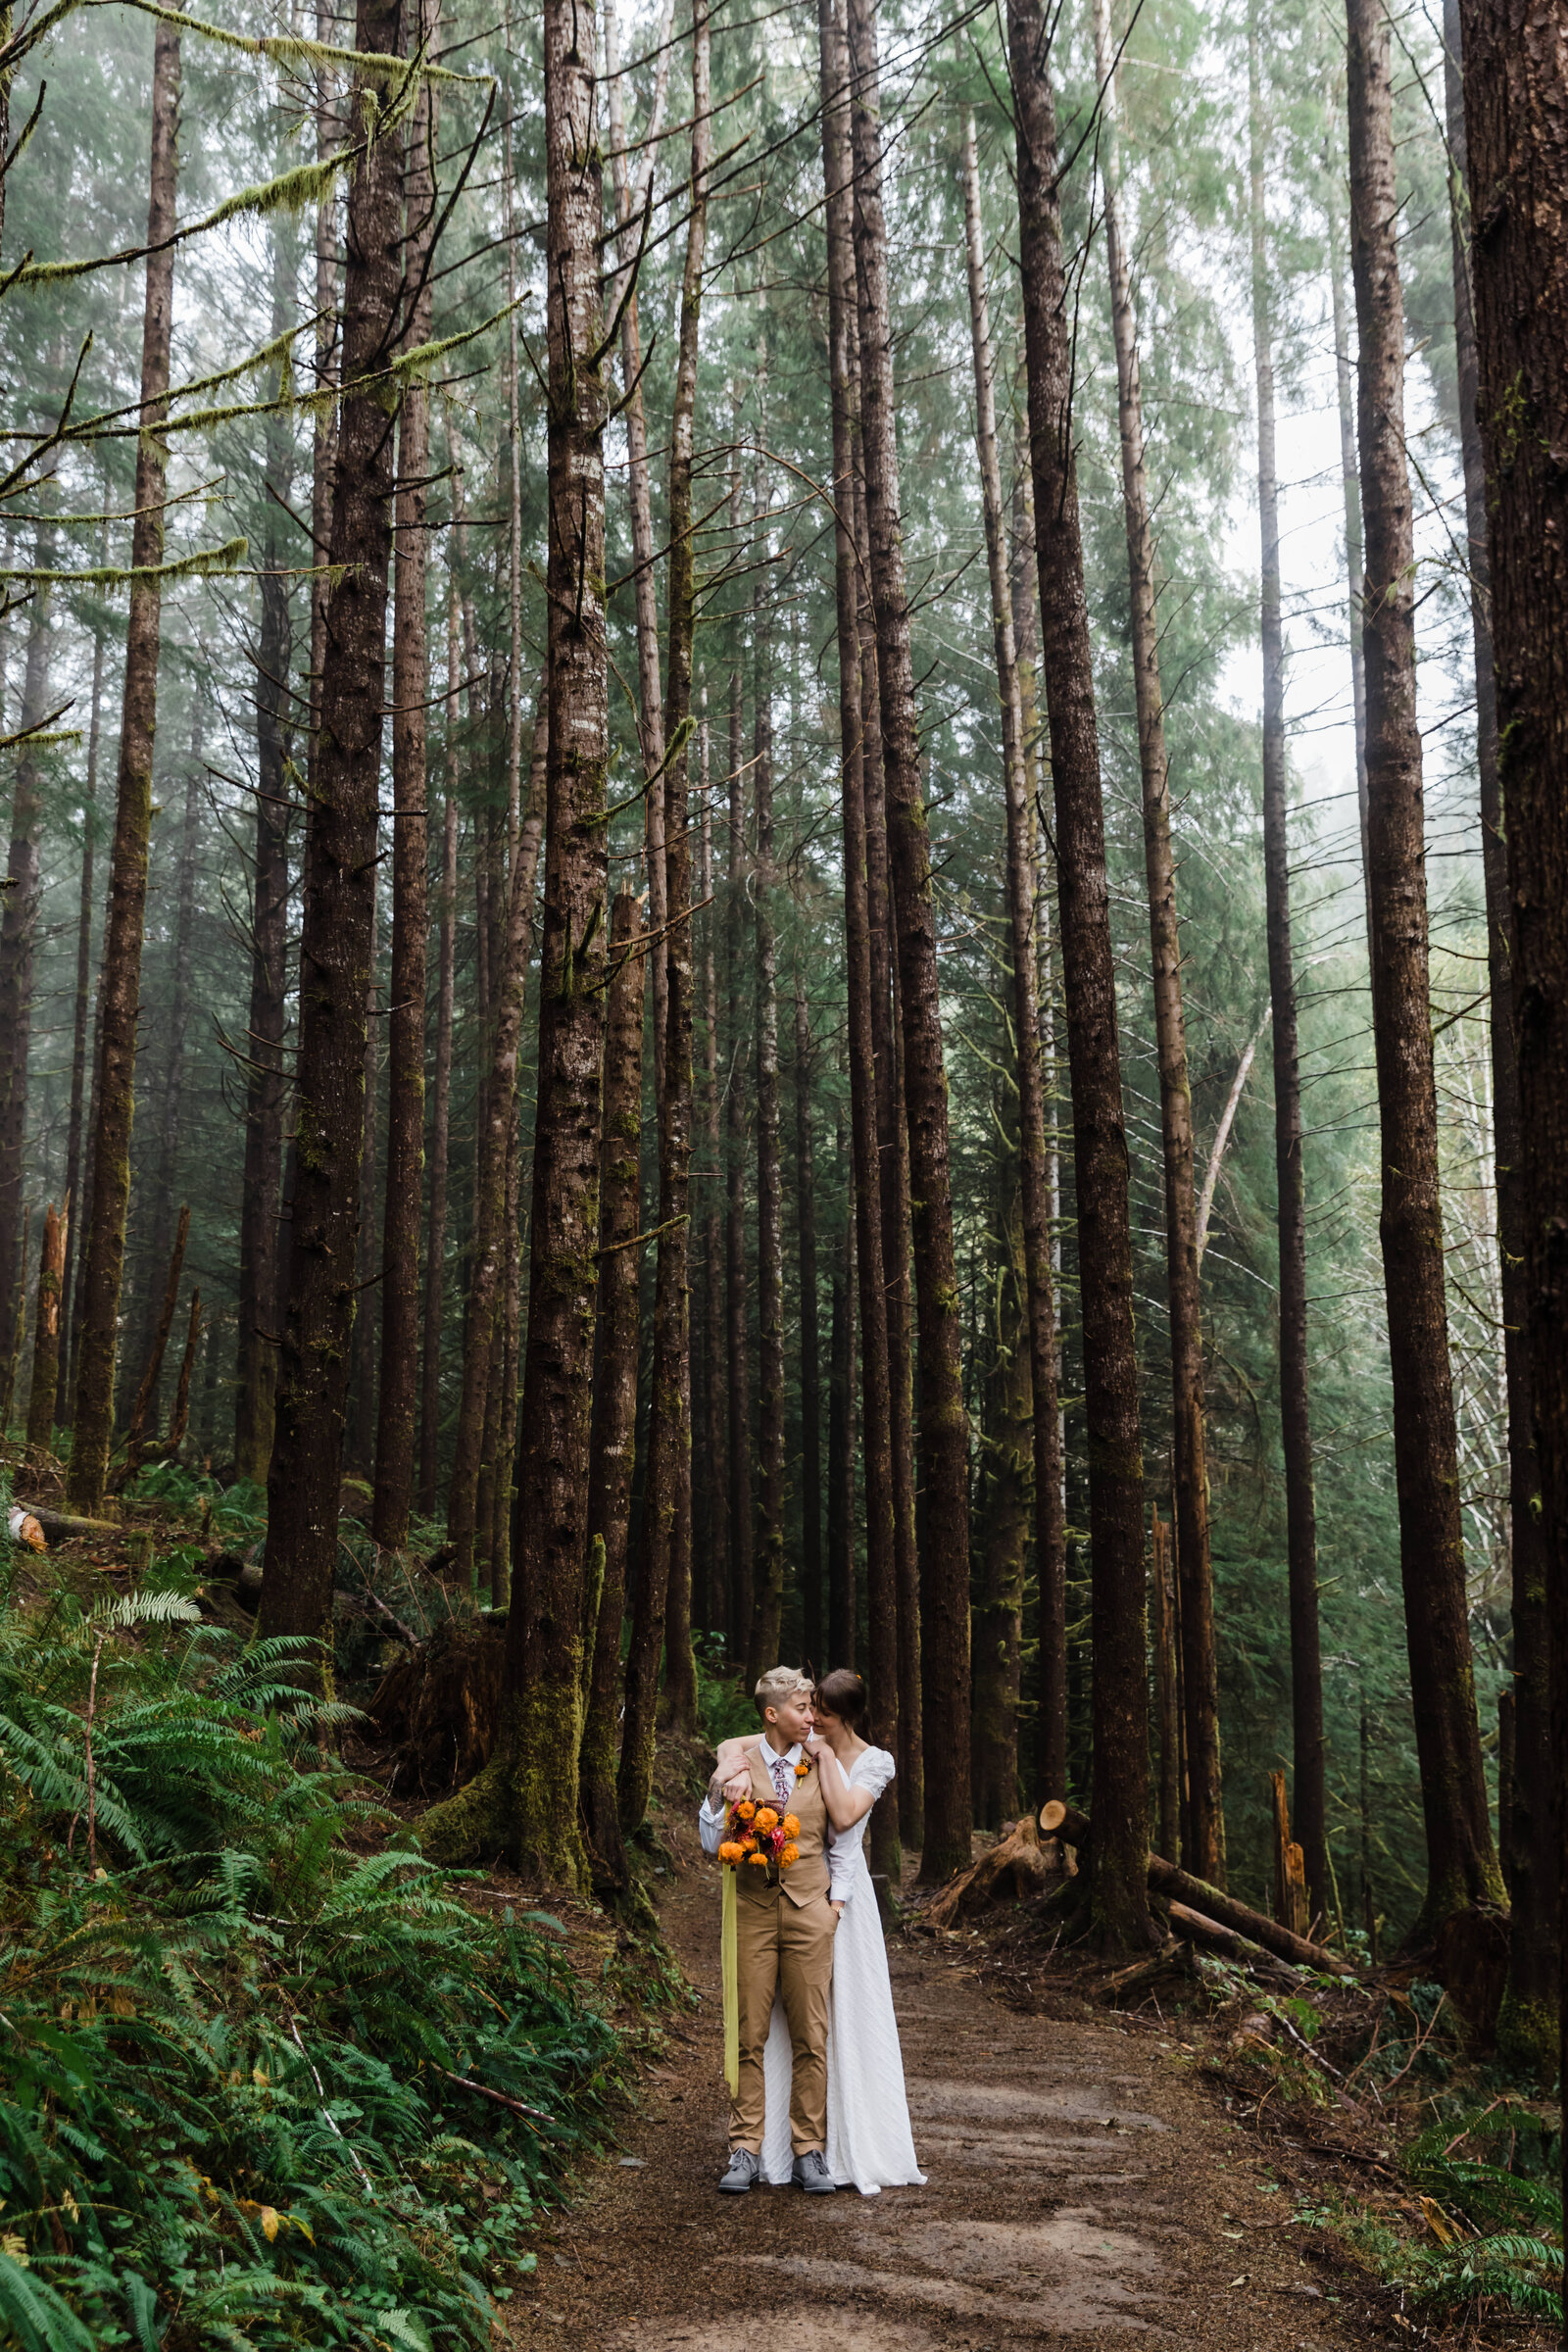 Two brides, one wearing a cap sleeve white dress nuzzled into a blond, short pixie haired bride wearing a tan vest and pants holding a bouquet of marigolds stand among the tall spruce trees for their Drift Creek Falls Oregon Adventure Elopement. | Erica Swantek Photography